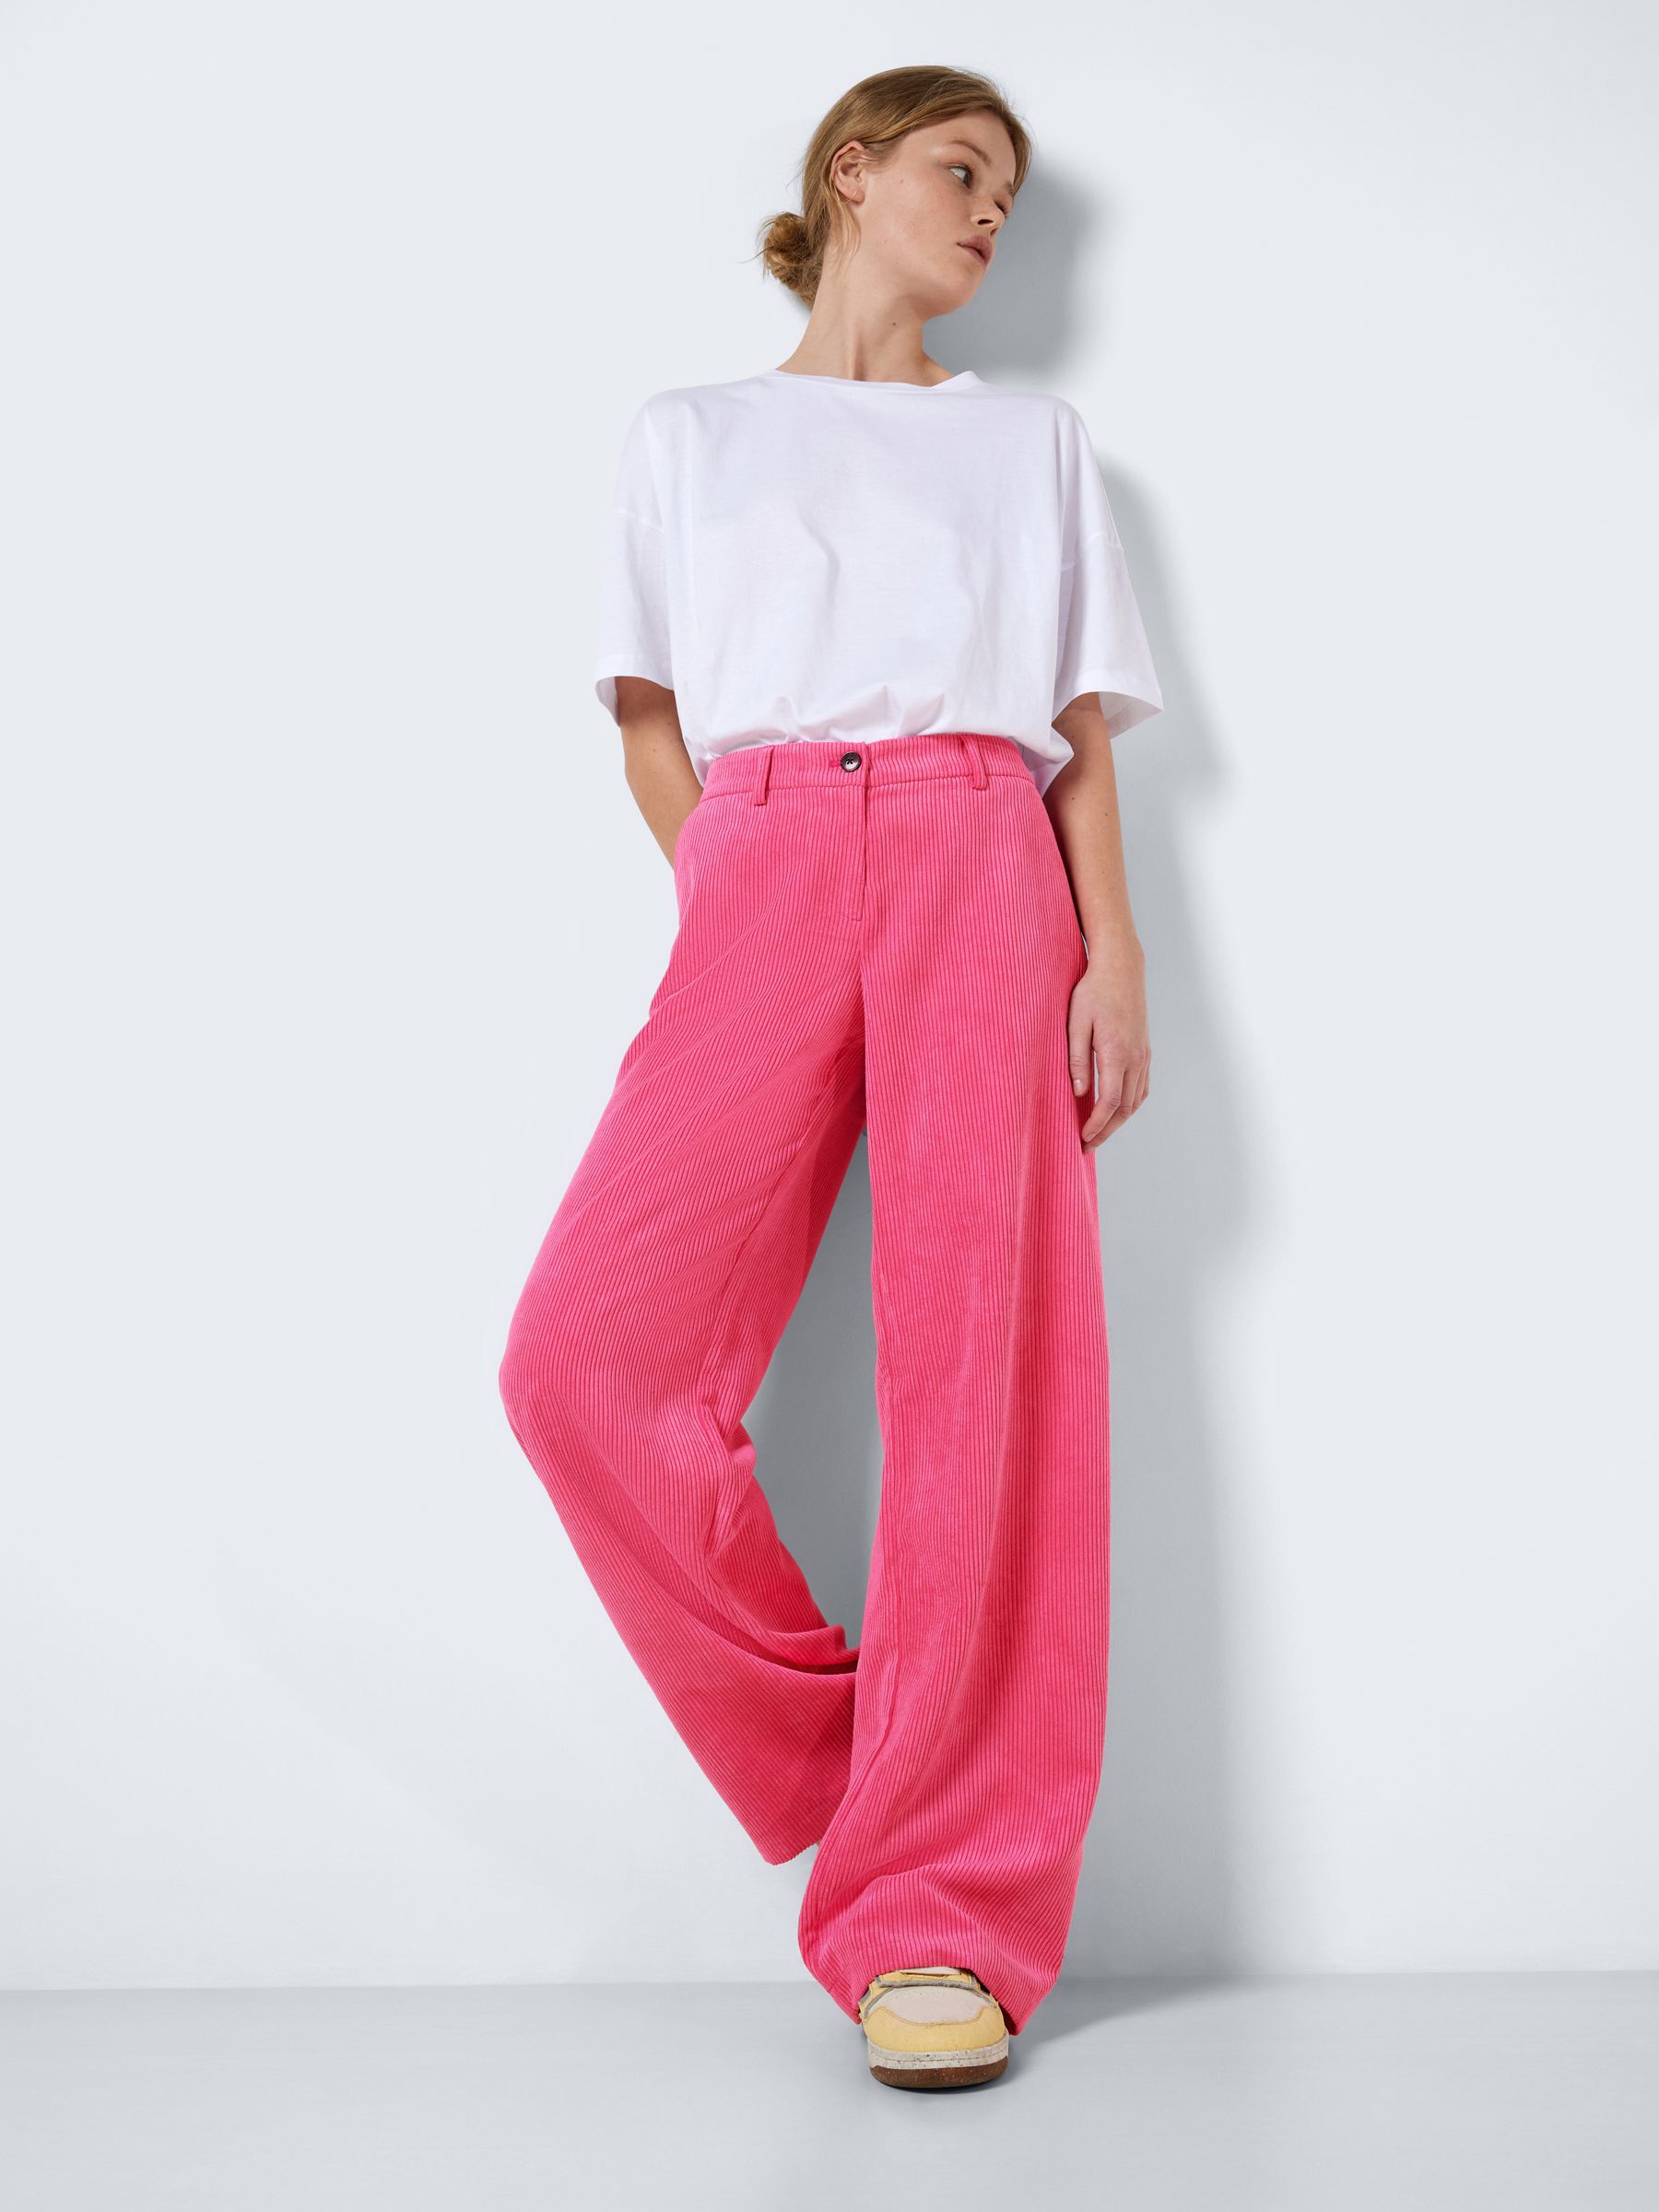 Find your new trousers from Noisy May online